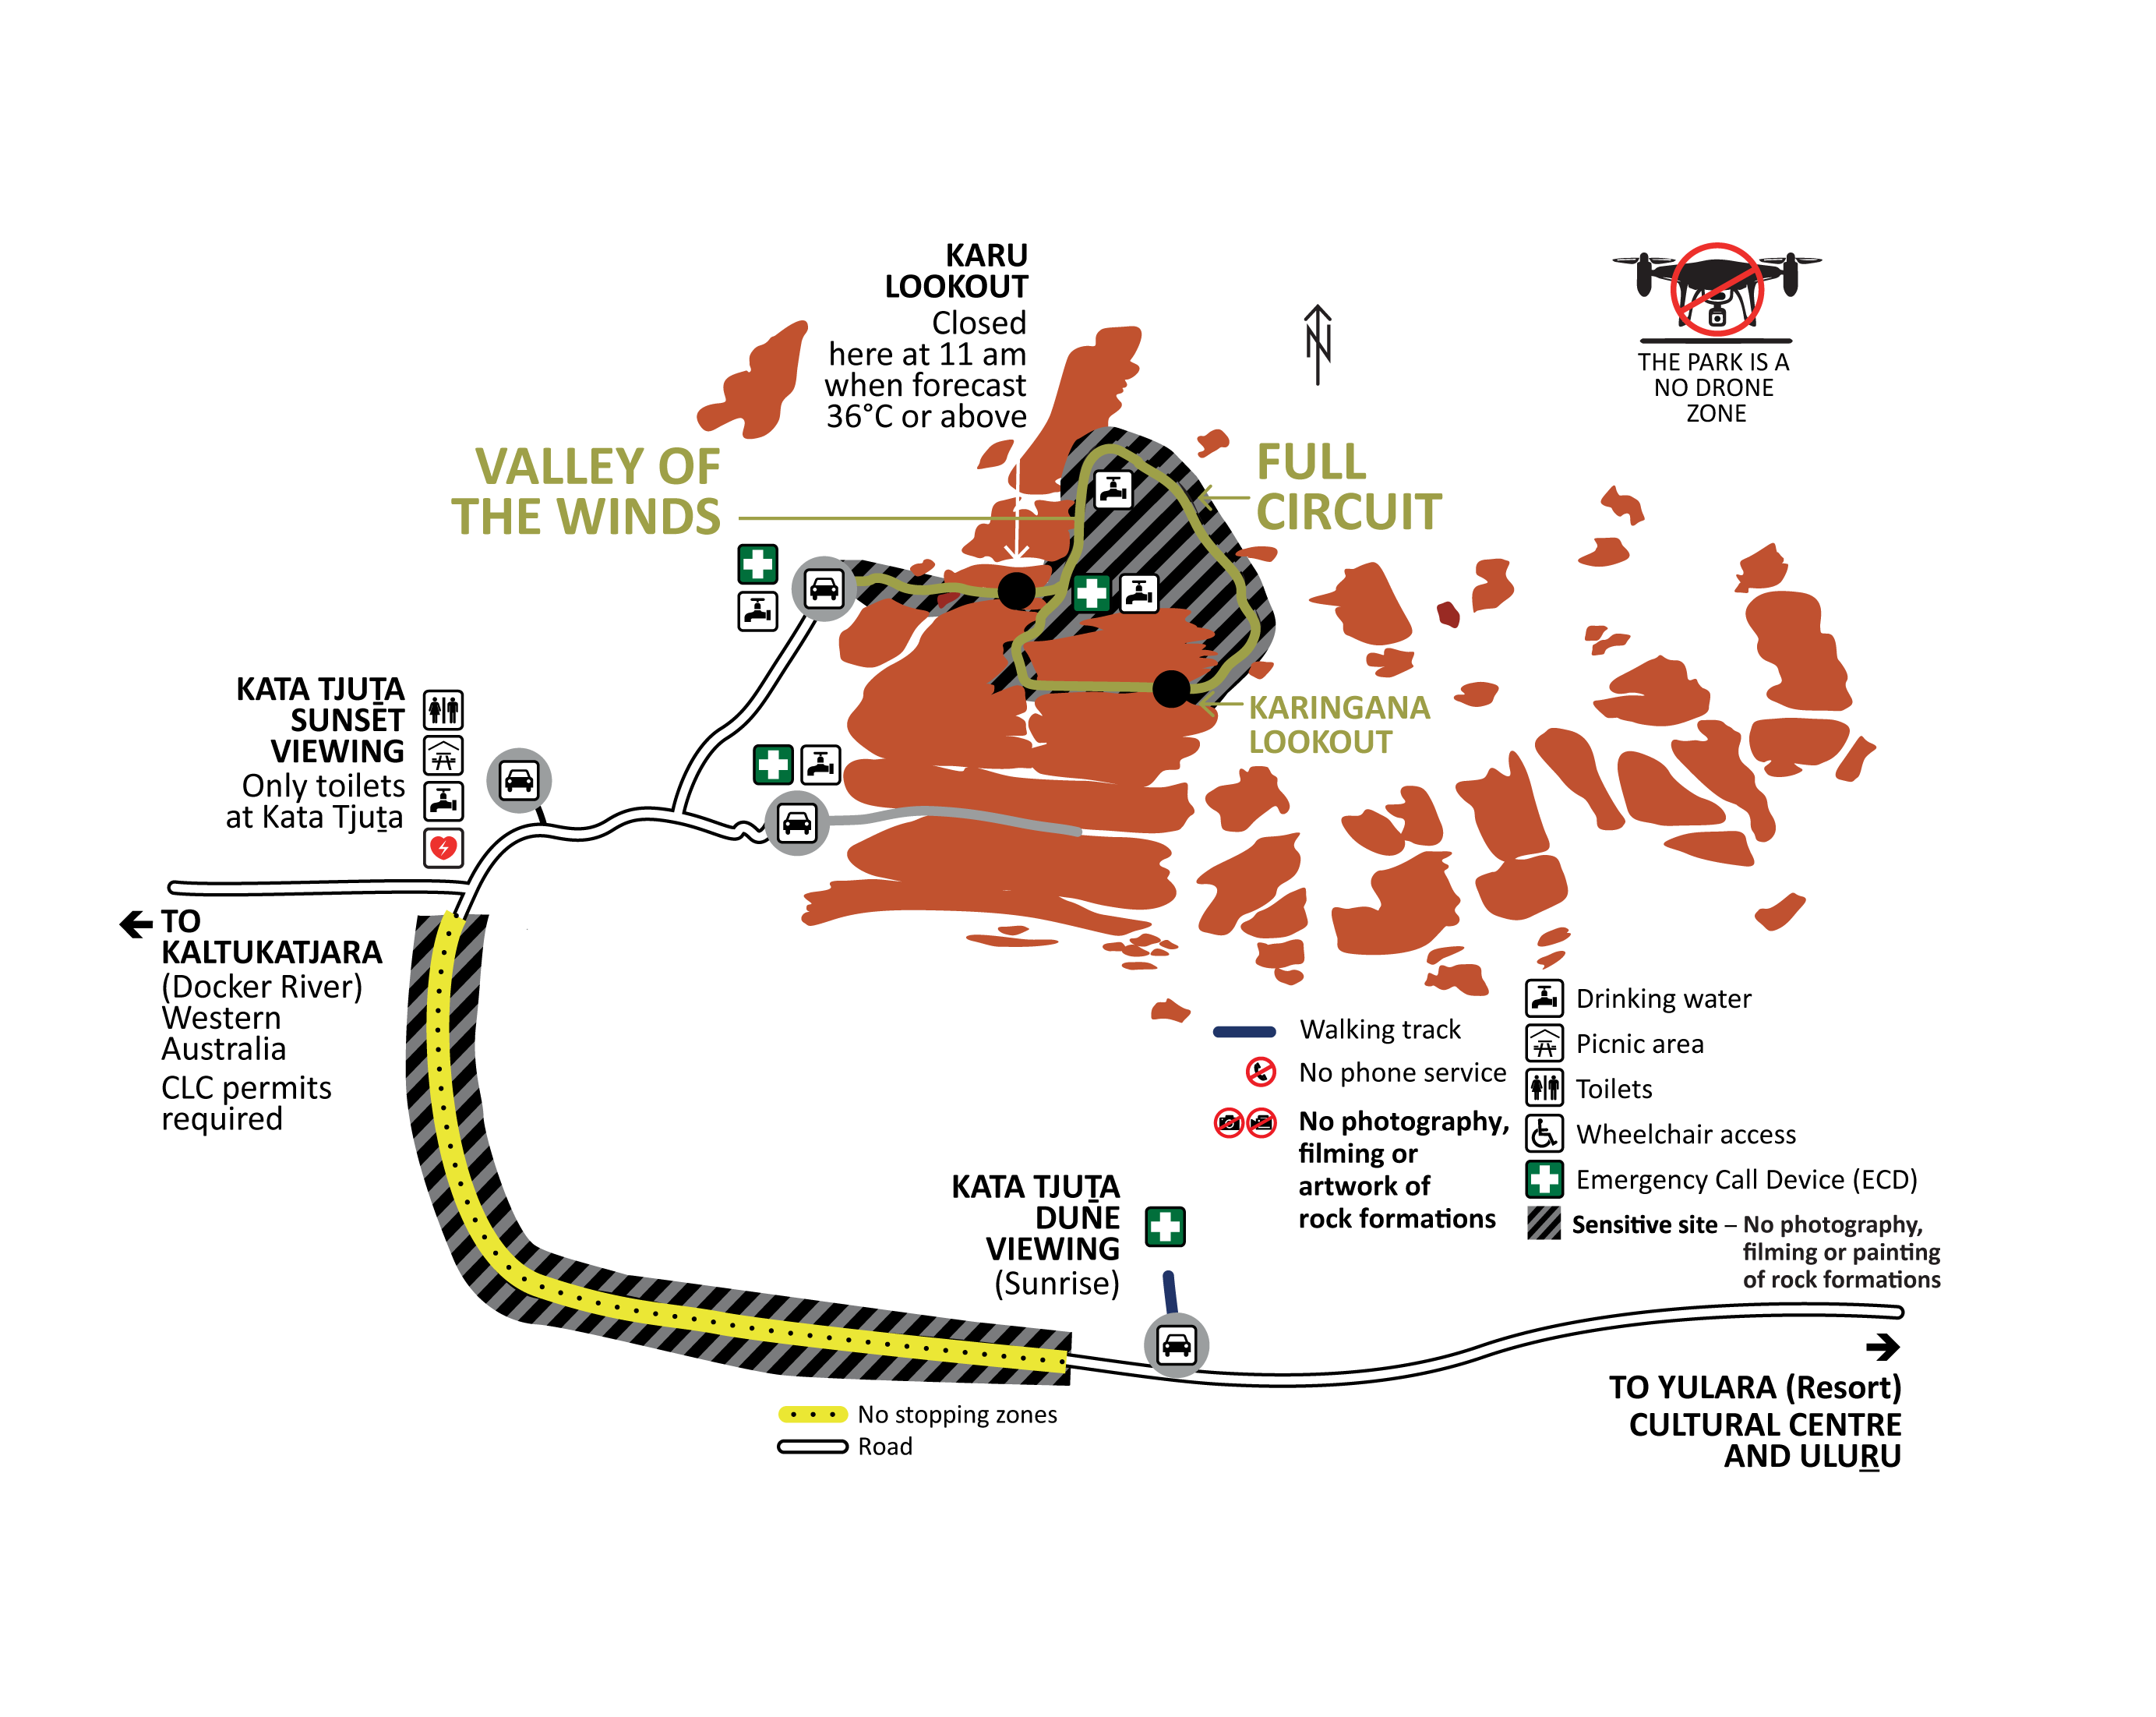 Map showing the Valley of the Winds walk